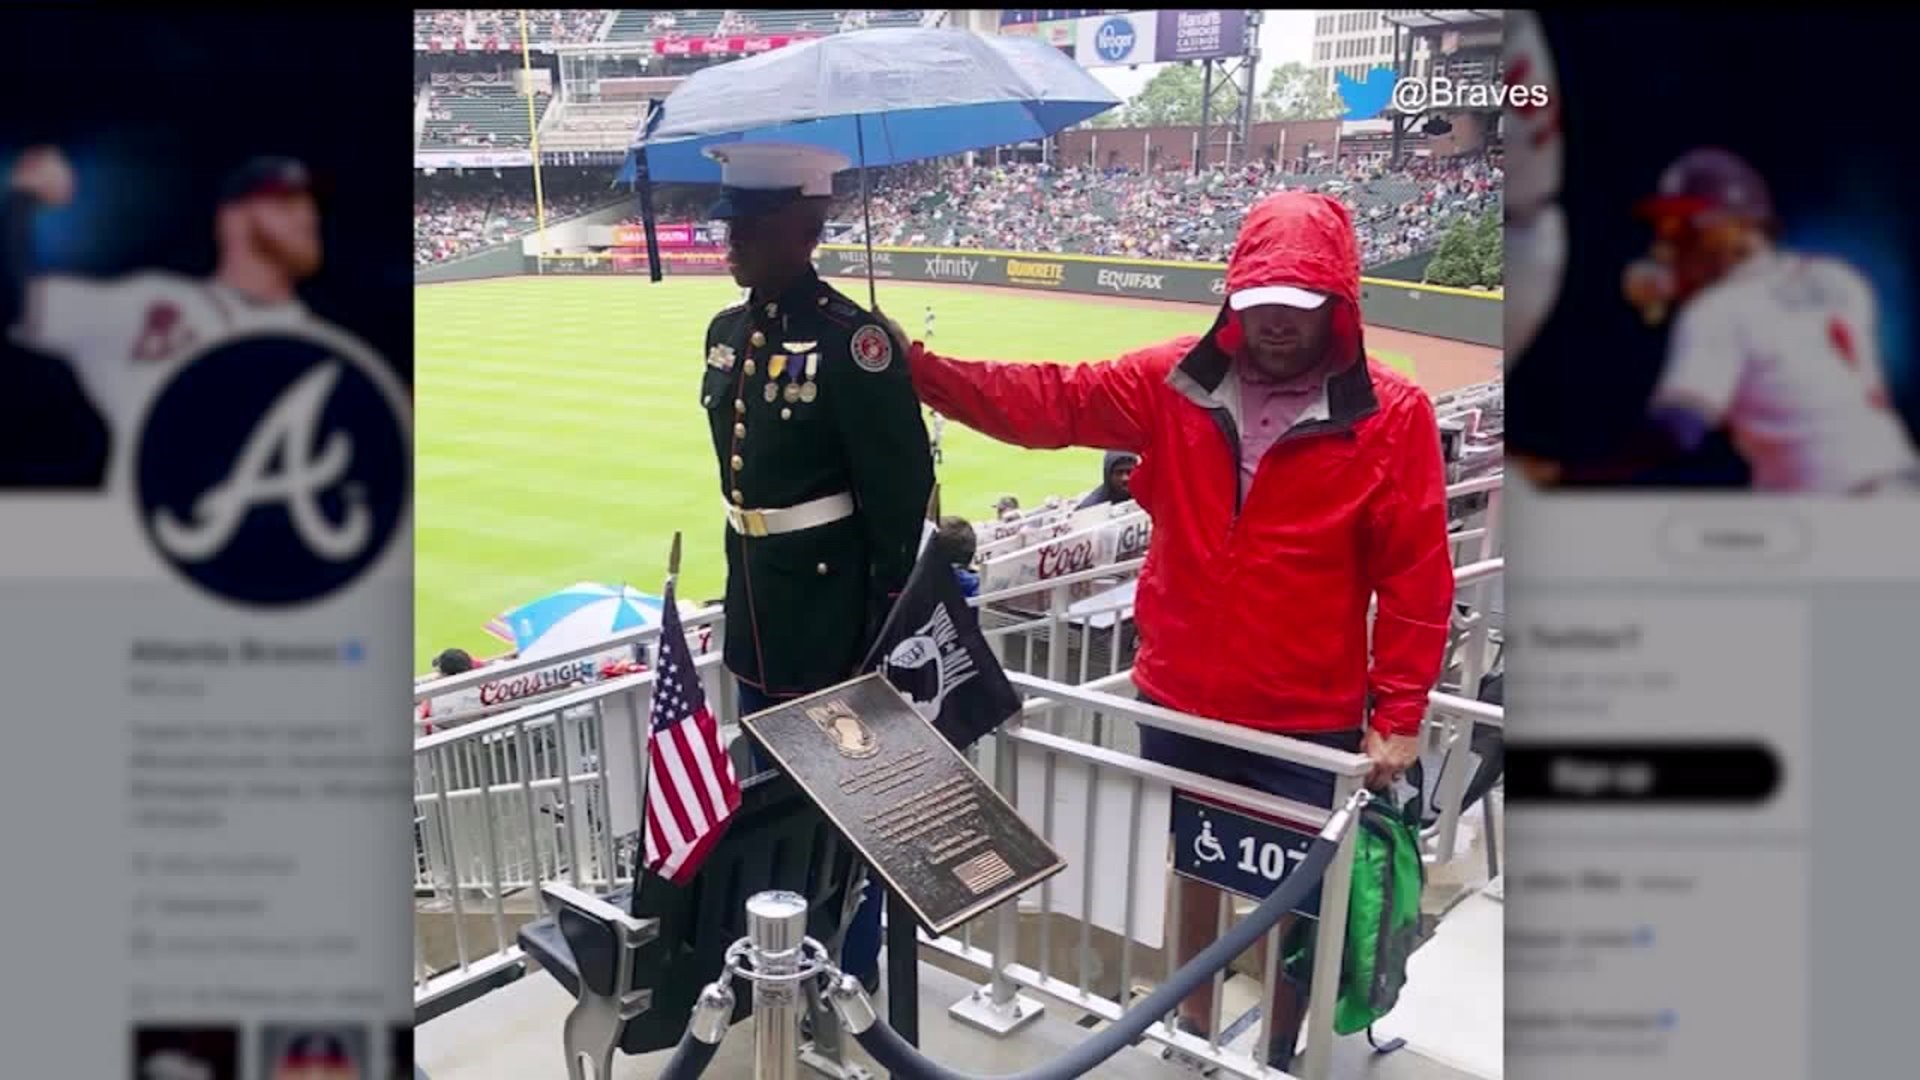 Baseball fan stands in rain to hold umbrella over JROTC member